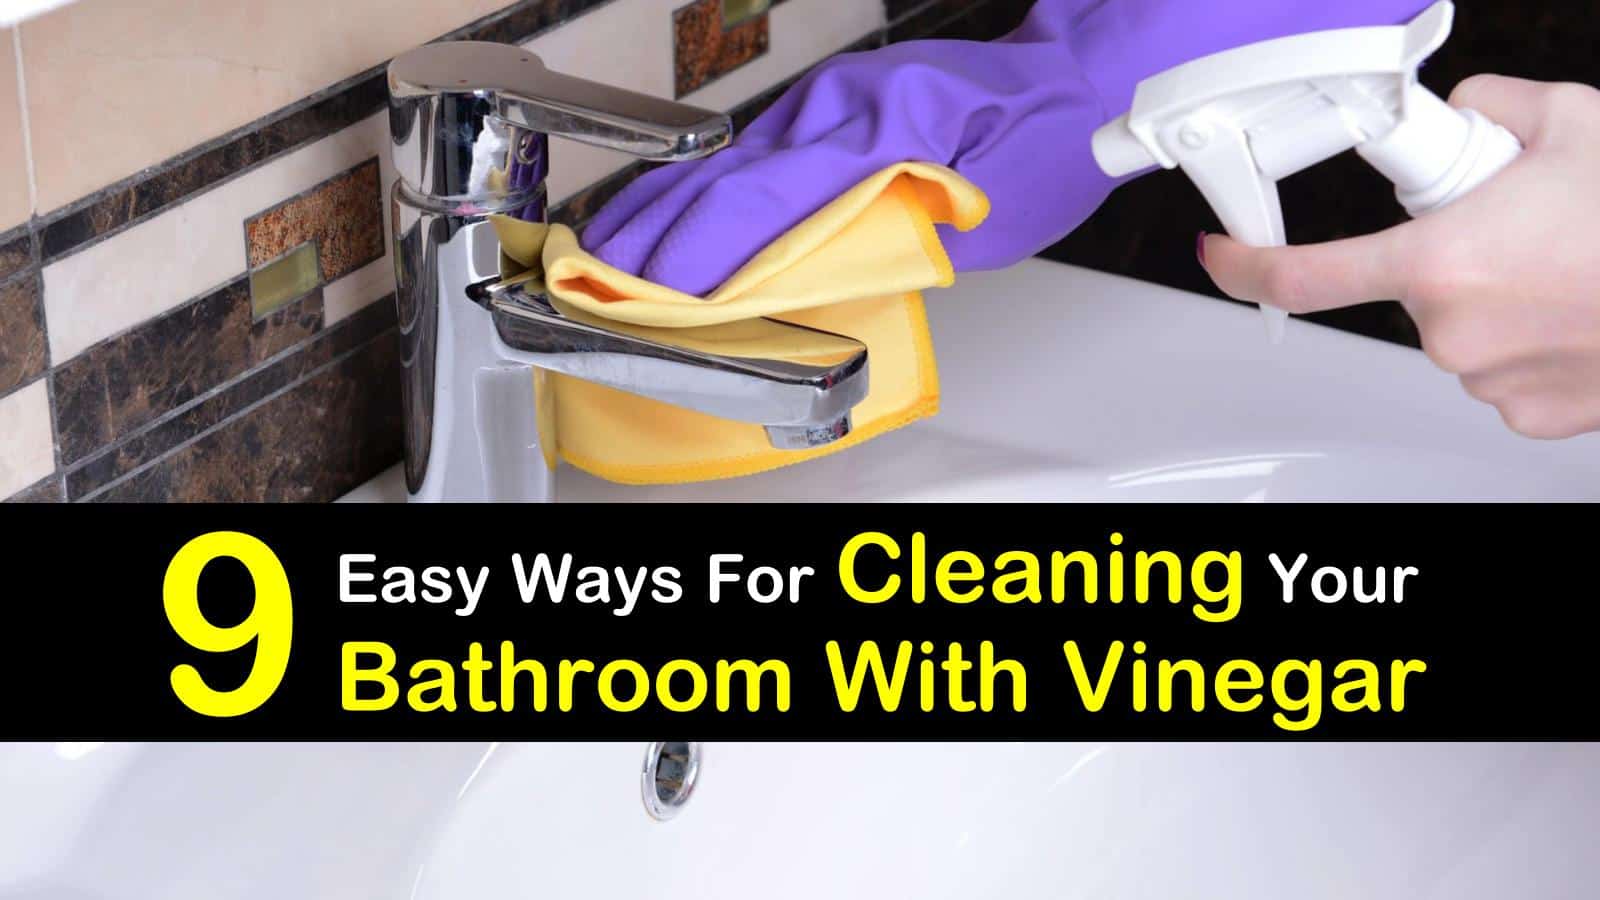 Cleaning A Bathroom With Vinegar, How To Clean Bathtub With Vinegar